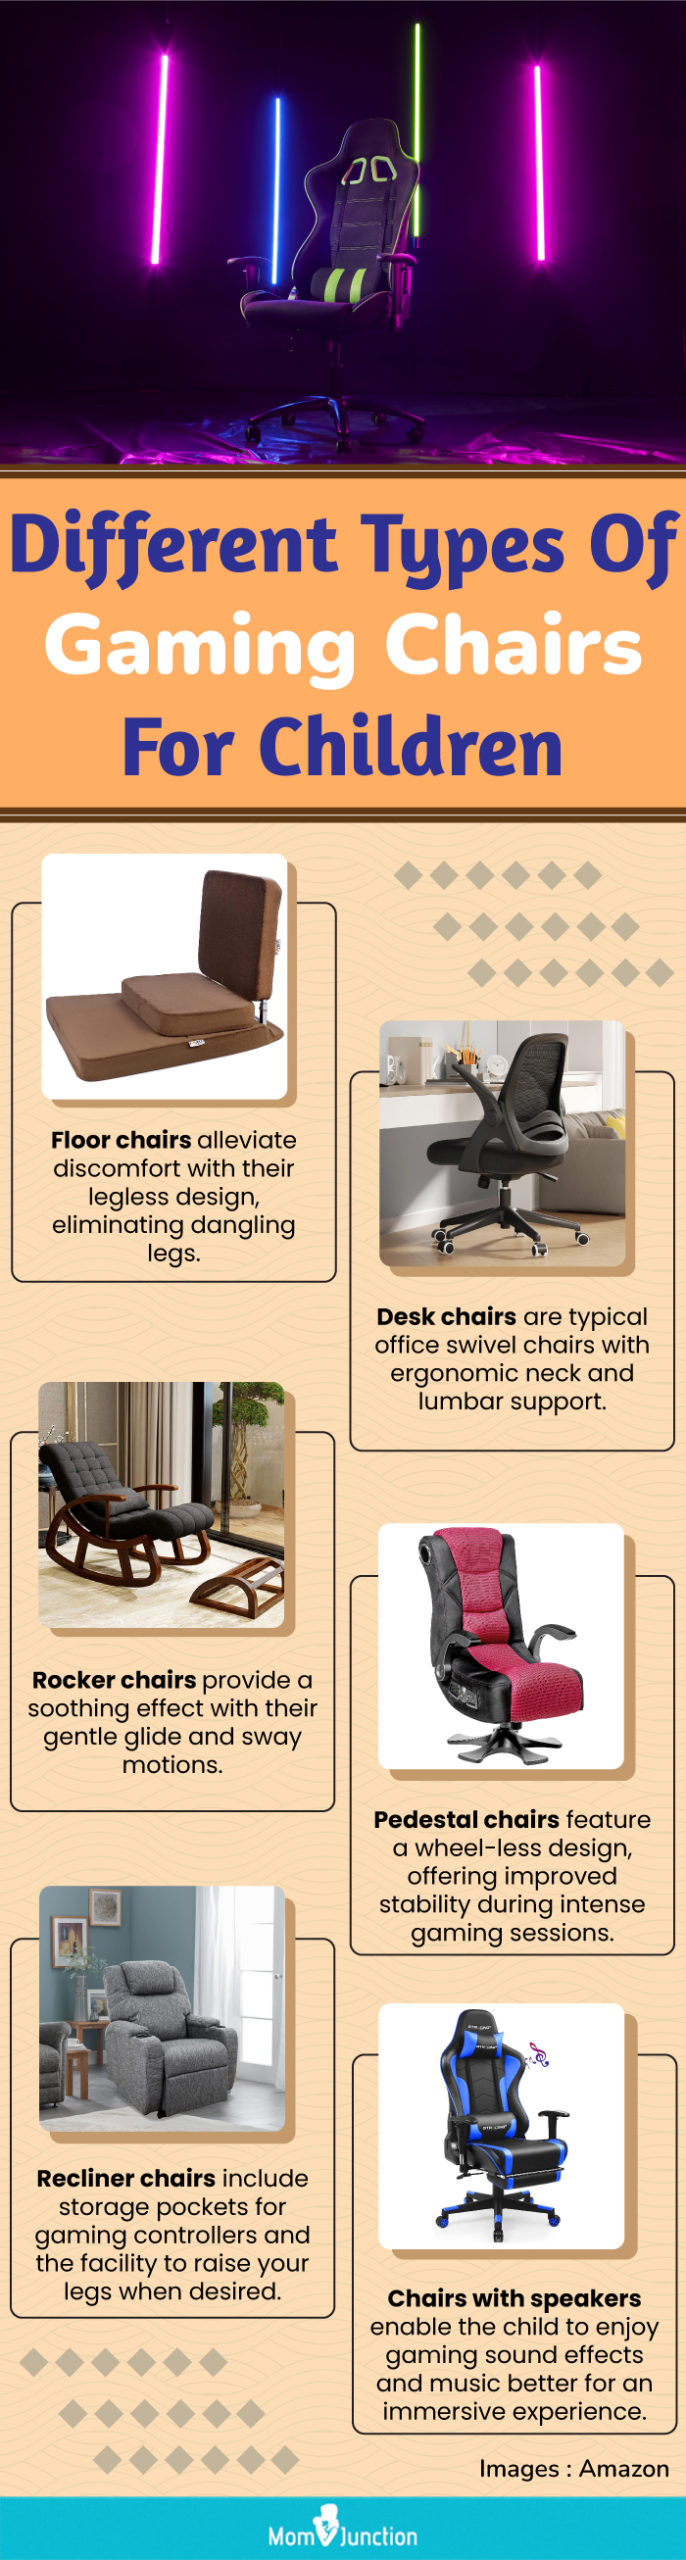 Different Types Of Gaming Chairs For Children (infographic)